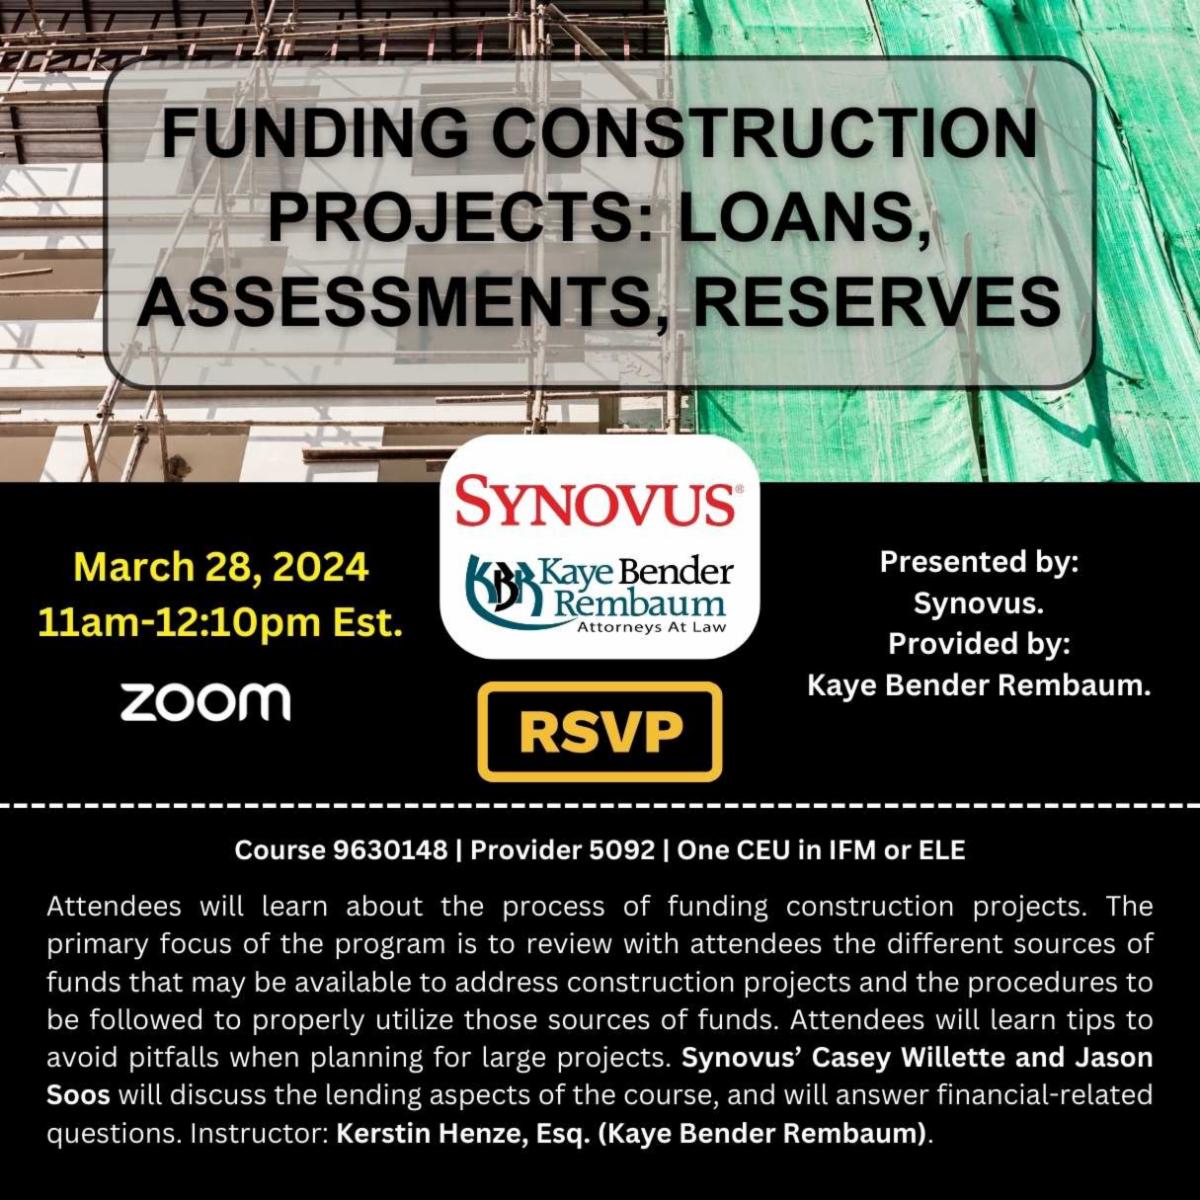 Funding Construction Projects (Loans, Assessments & Reserves)  Presented by Synovus. Course provided & taught by Kaye Bender Rembaum’s Kerstin Henze, Esq.